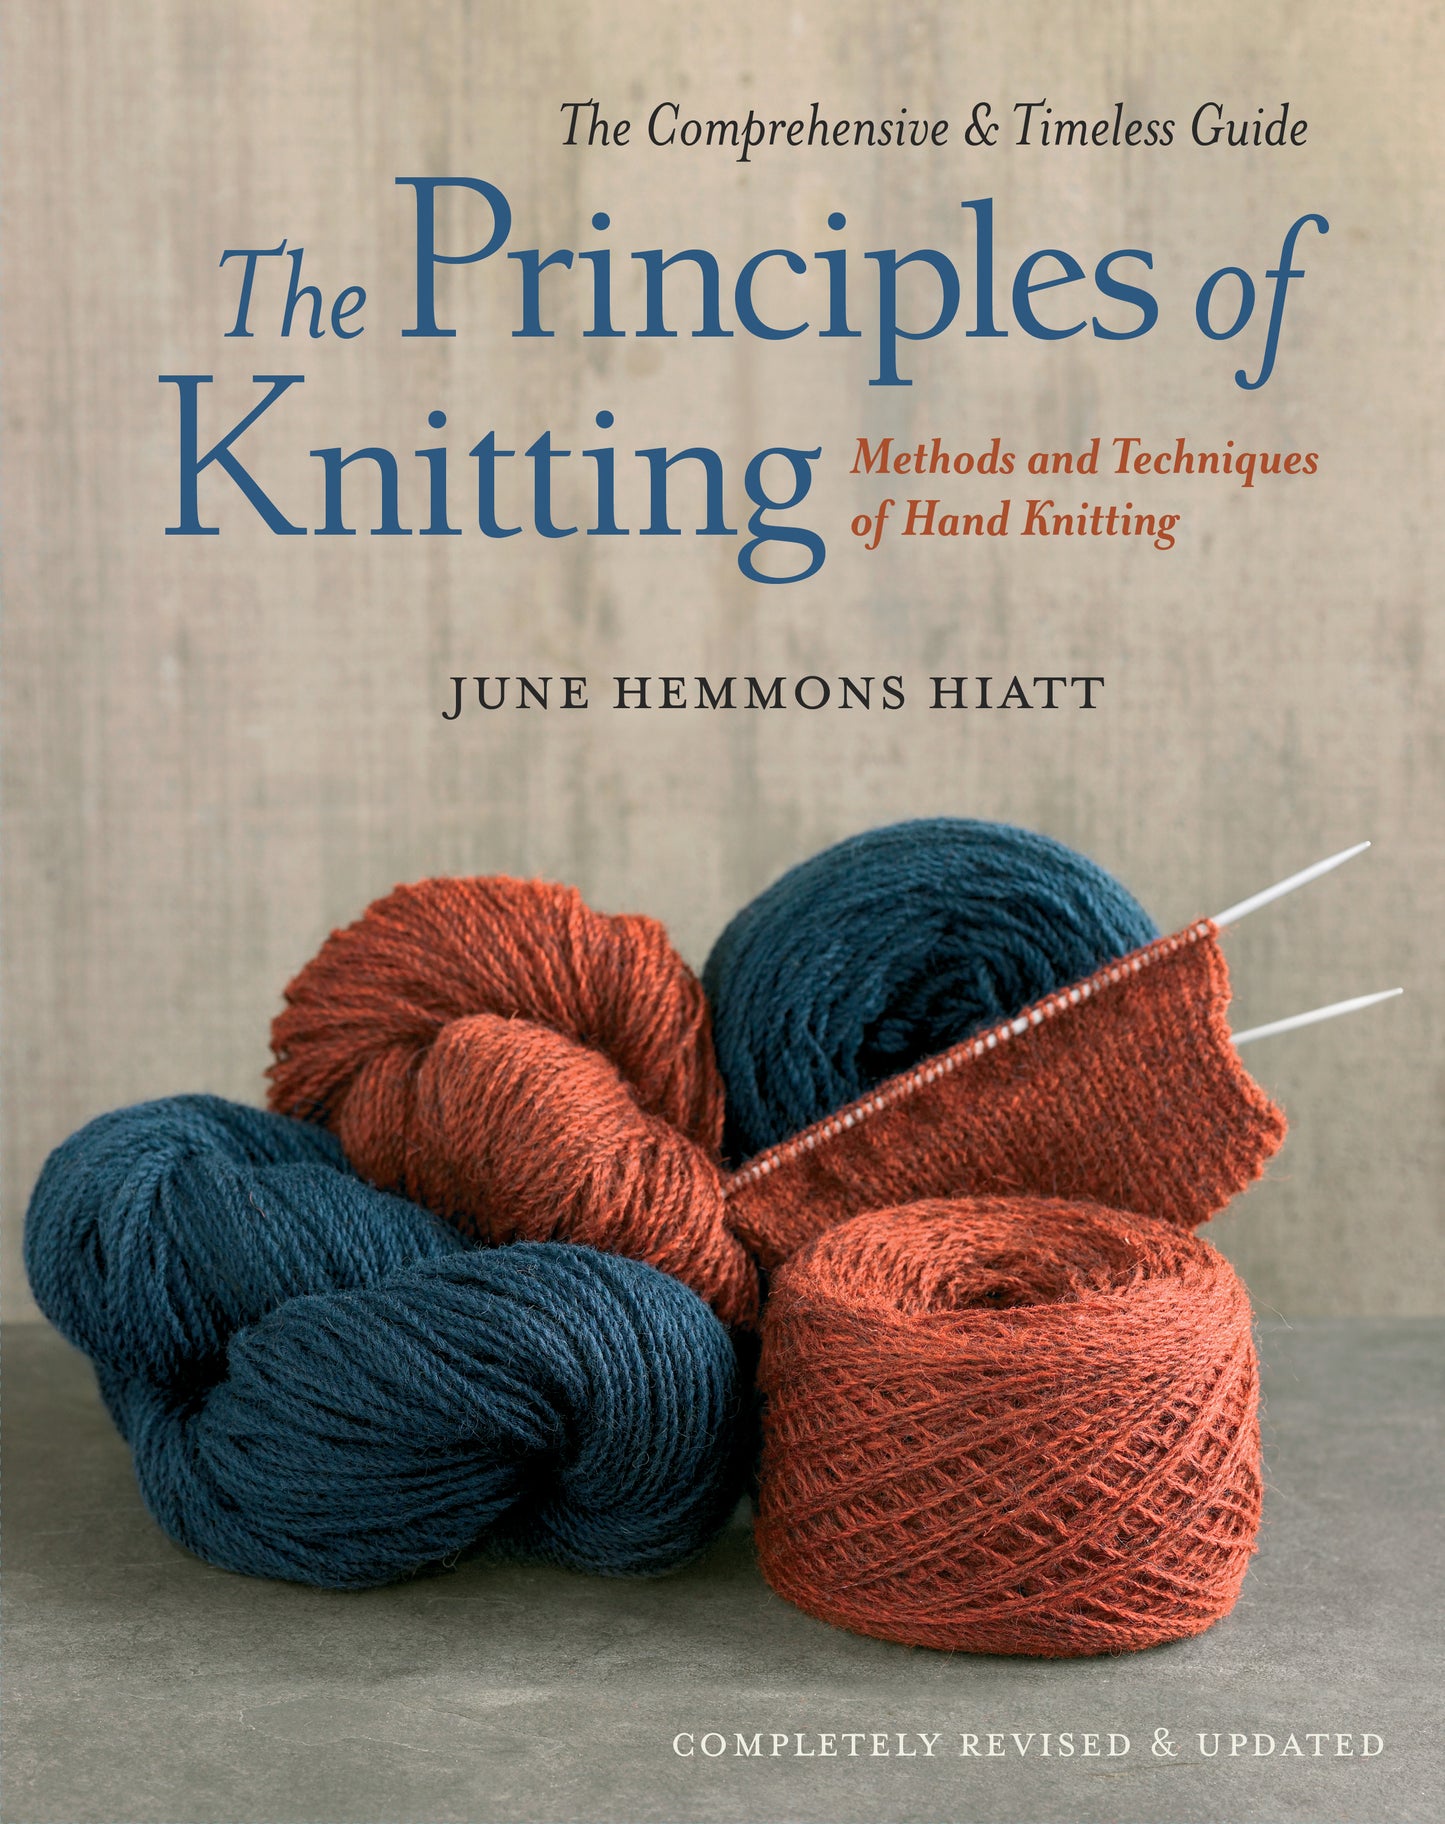 The Principles of Knitting | Methods and Techniques of Hand Knitting